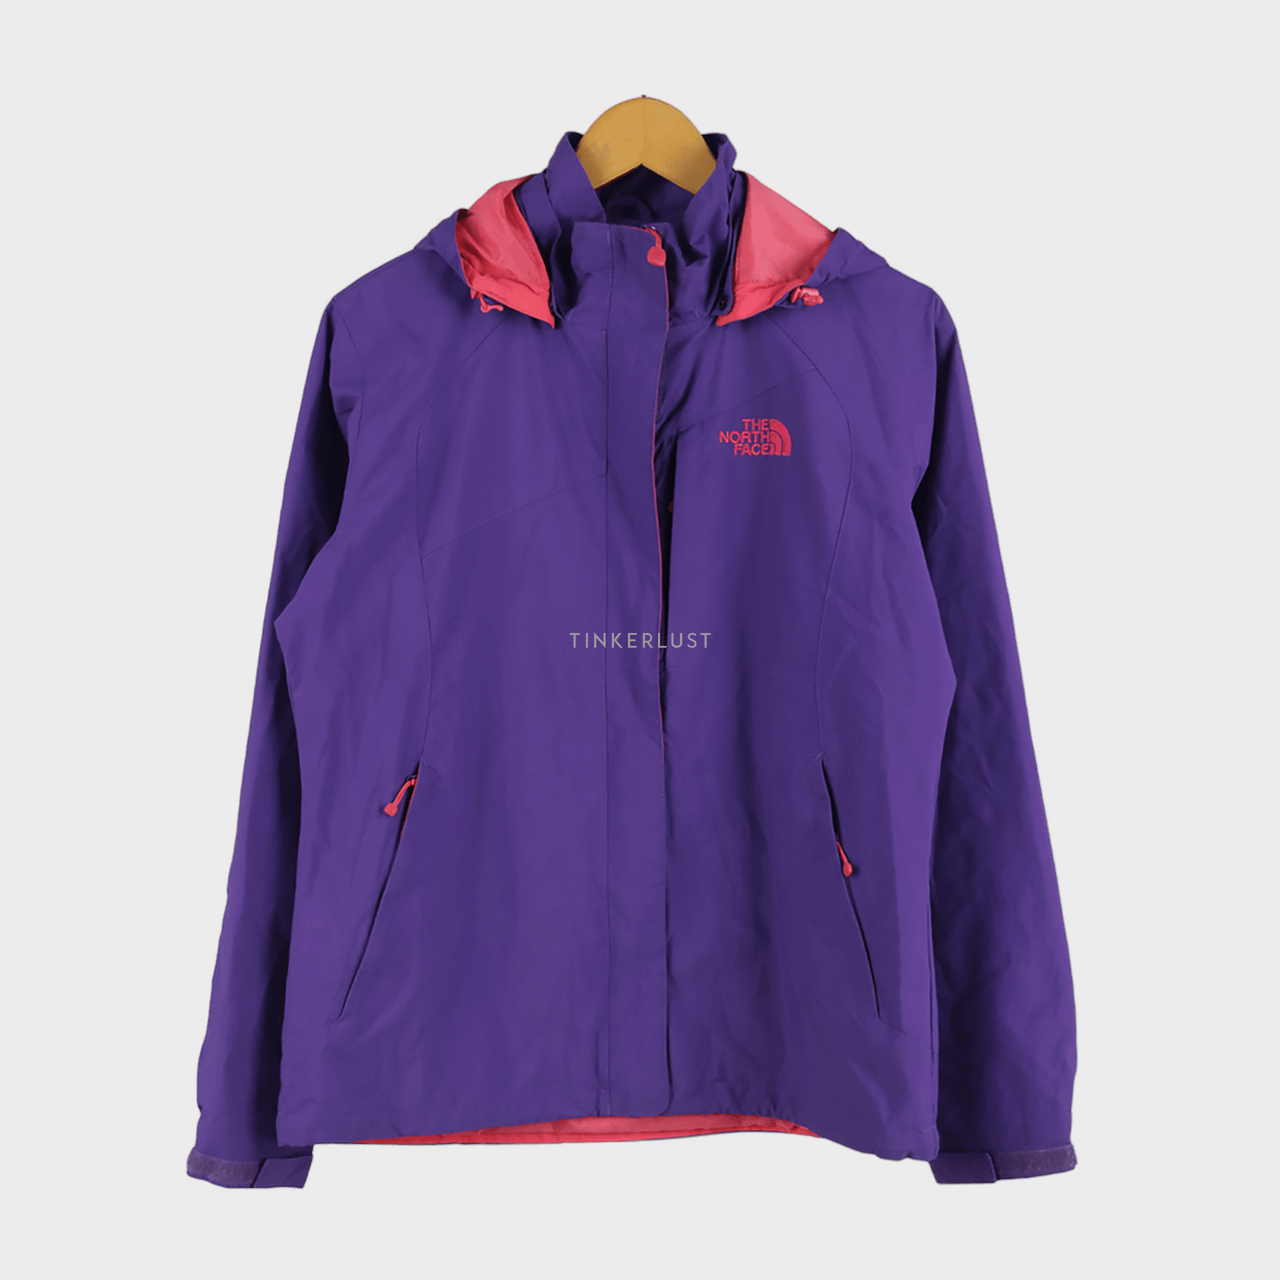 the north face Pink & Purple Hoodie Jacket